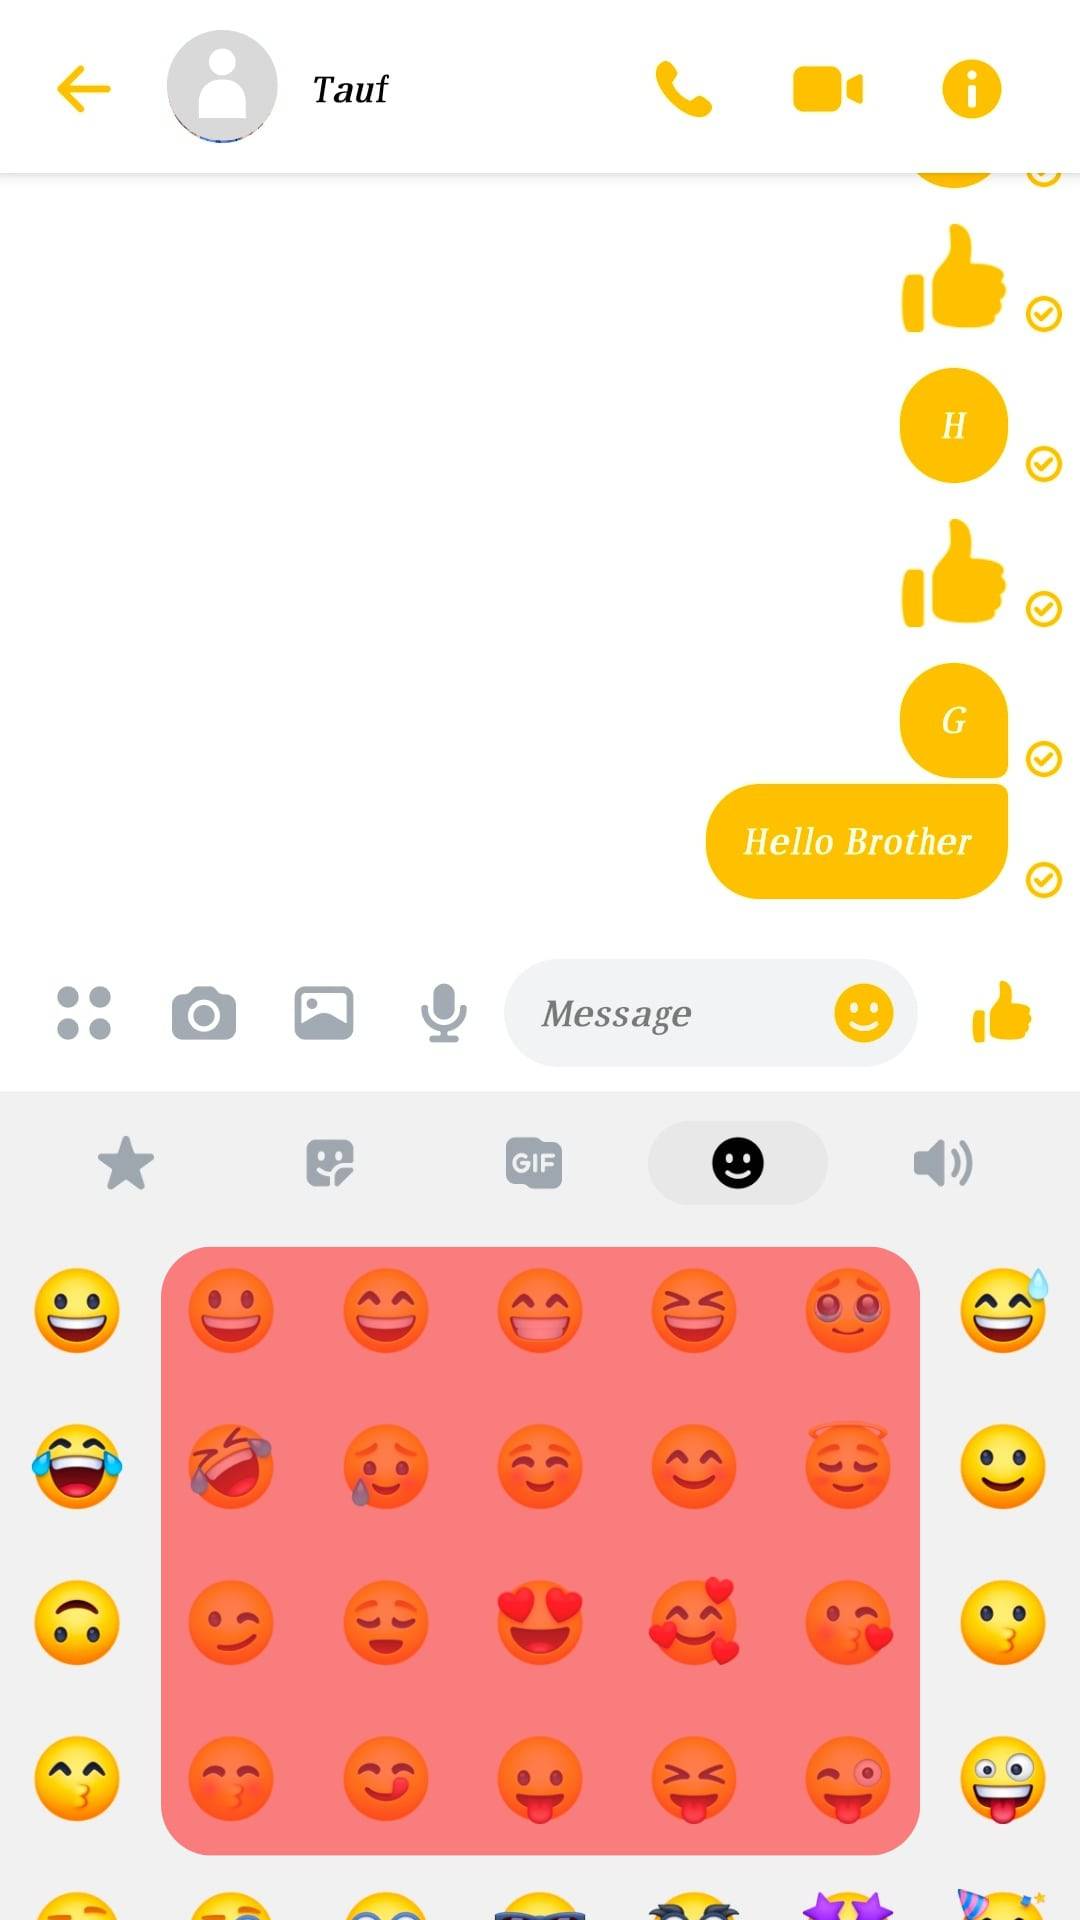 Scroll Through The Different Emojis.